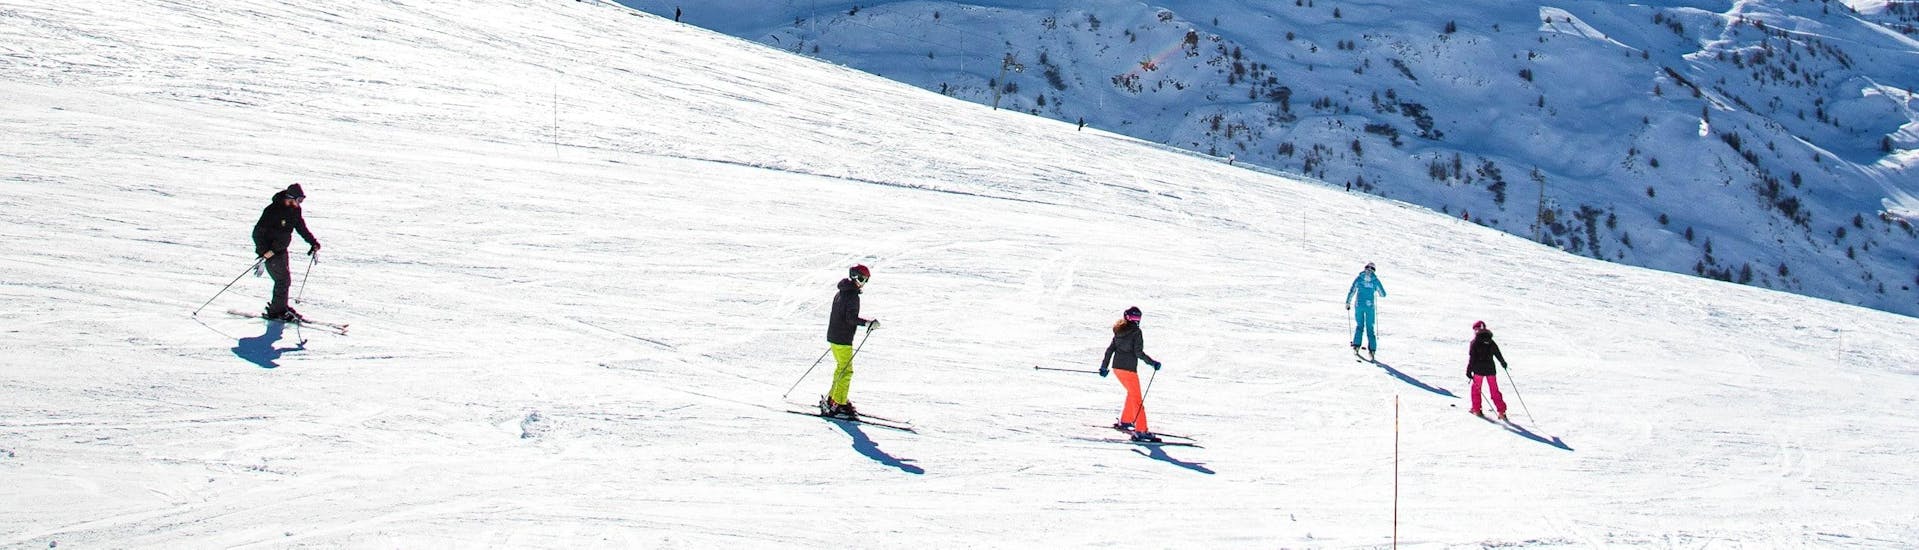 Skiers are skiing down a slope in confidence during their Adult Ski Lessons for All Levels with the ski school ESI Ski Family in Val Thorens.